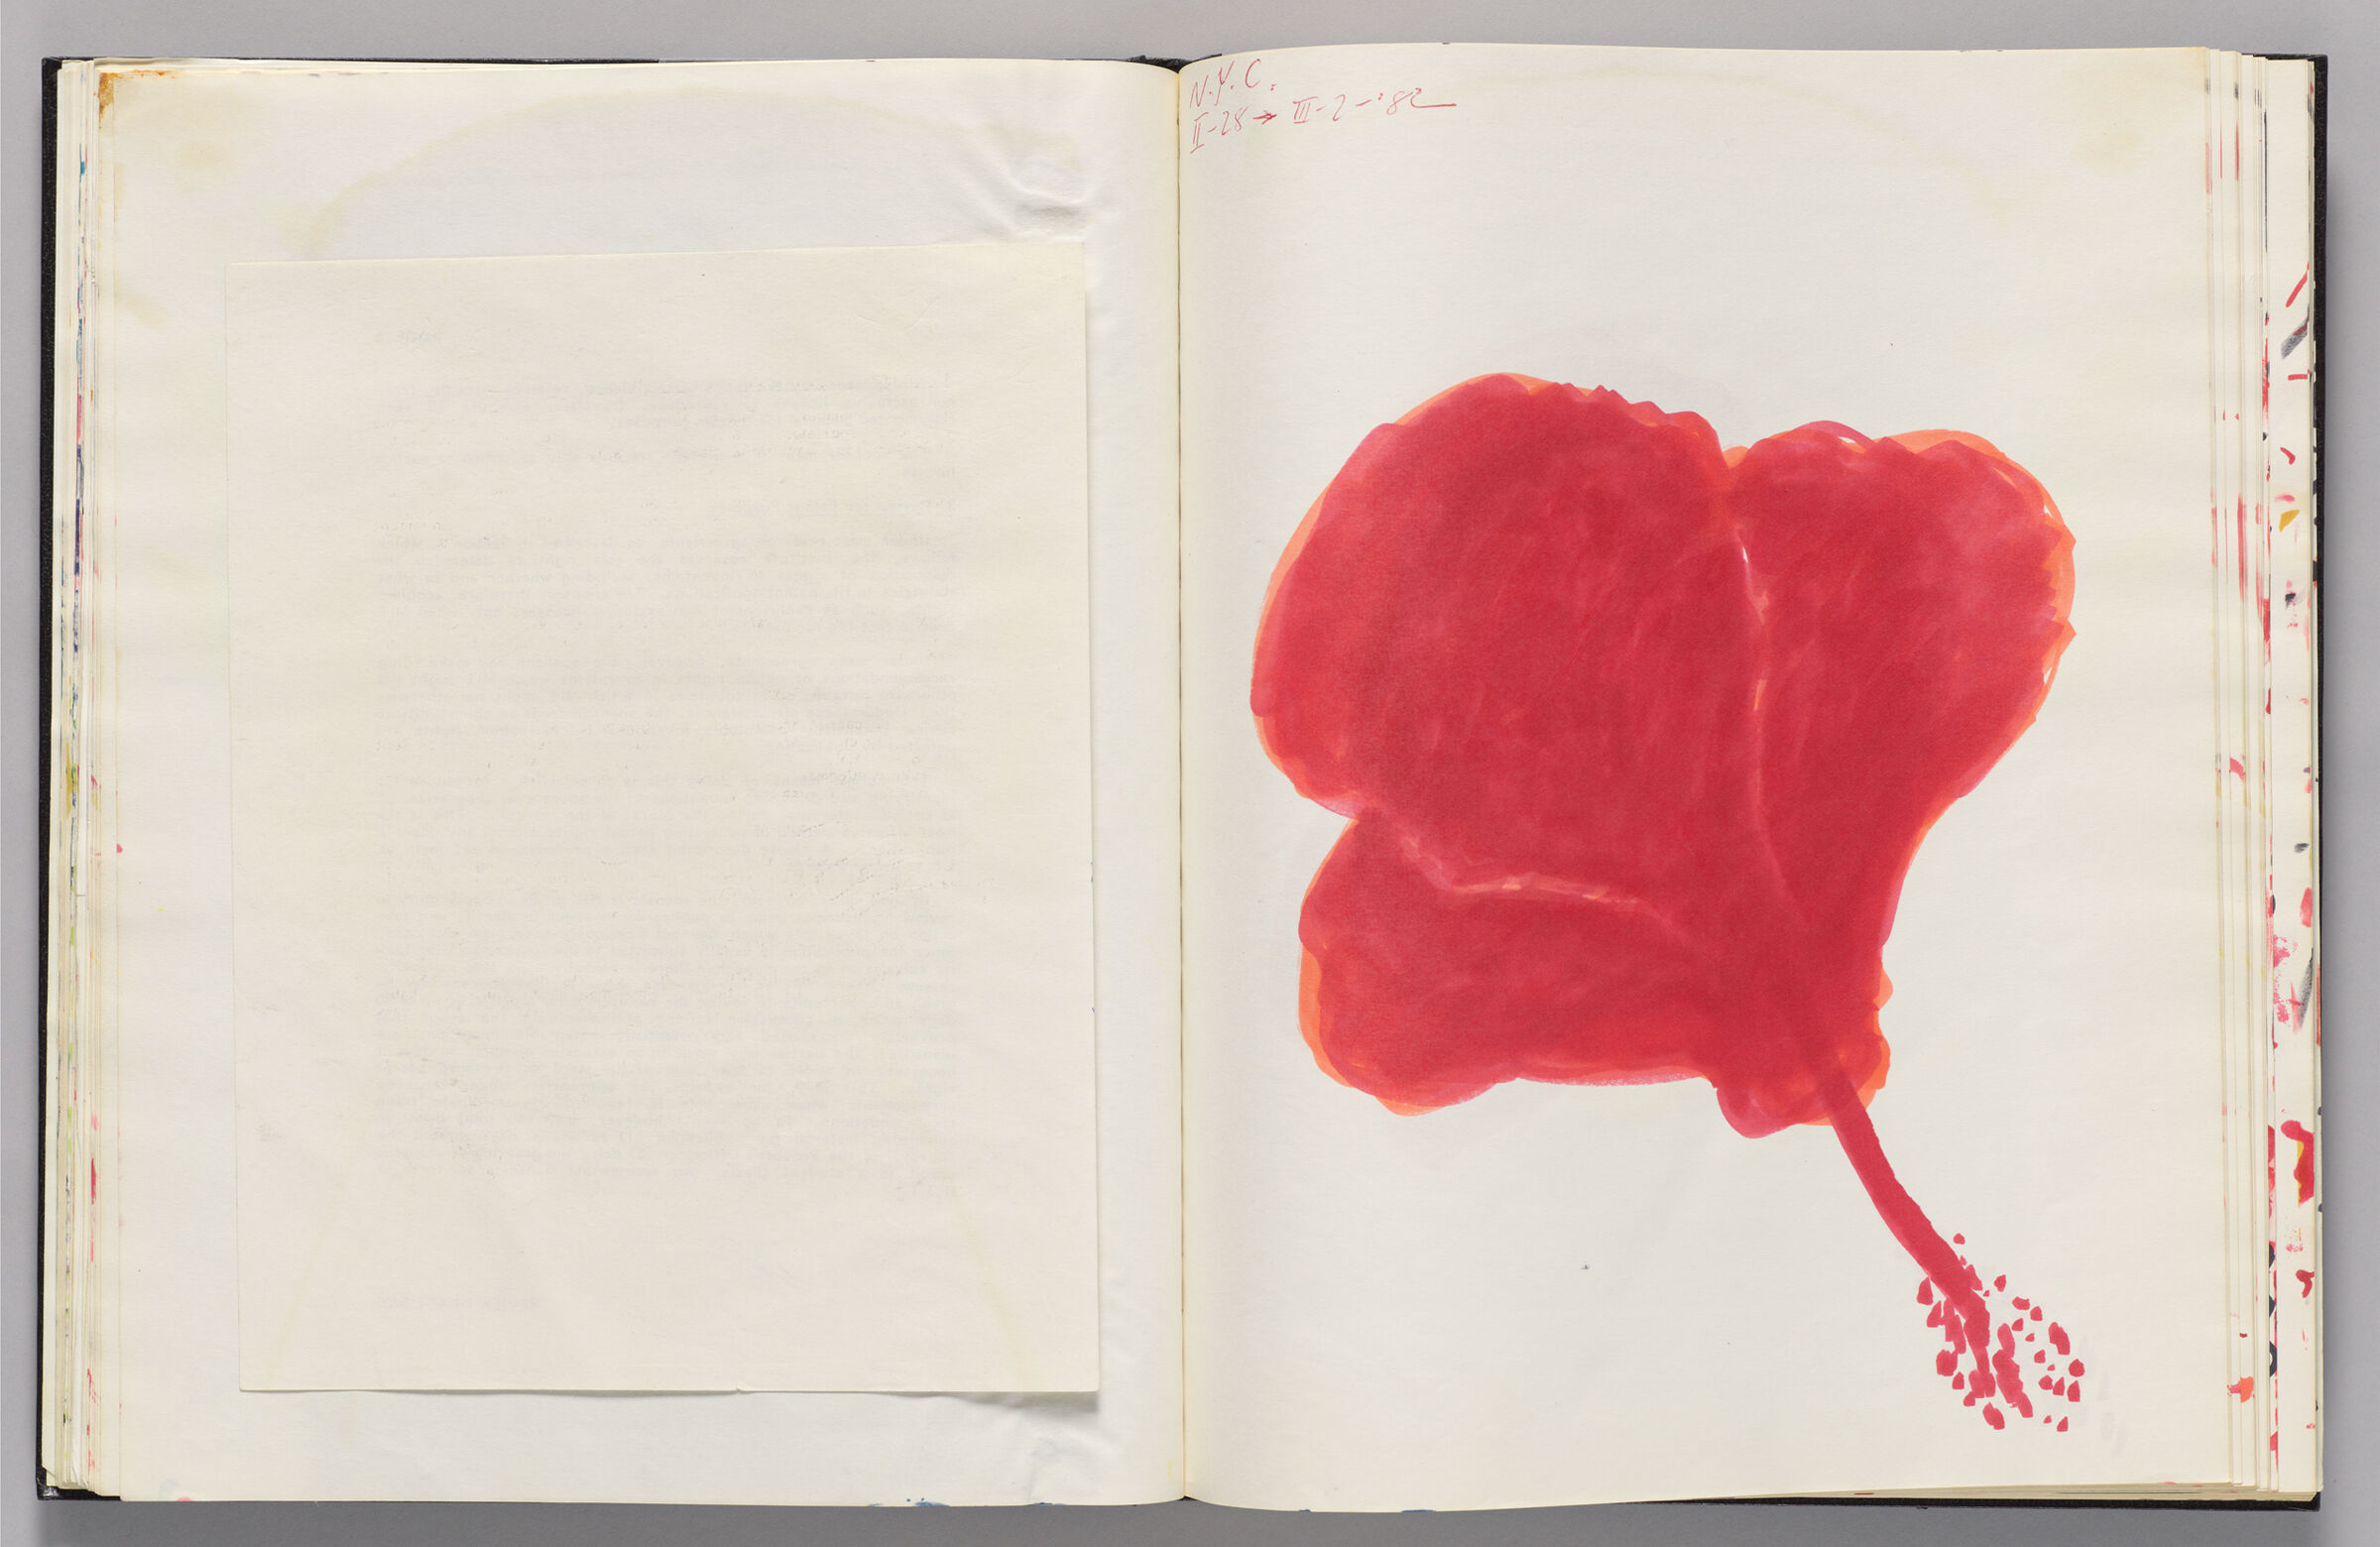 Untitled (Blank, Left Page); Untitled (Hibiscus, Right Page)